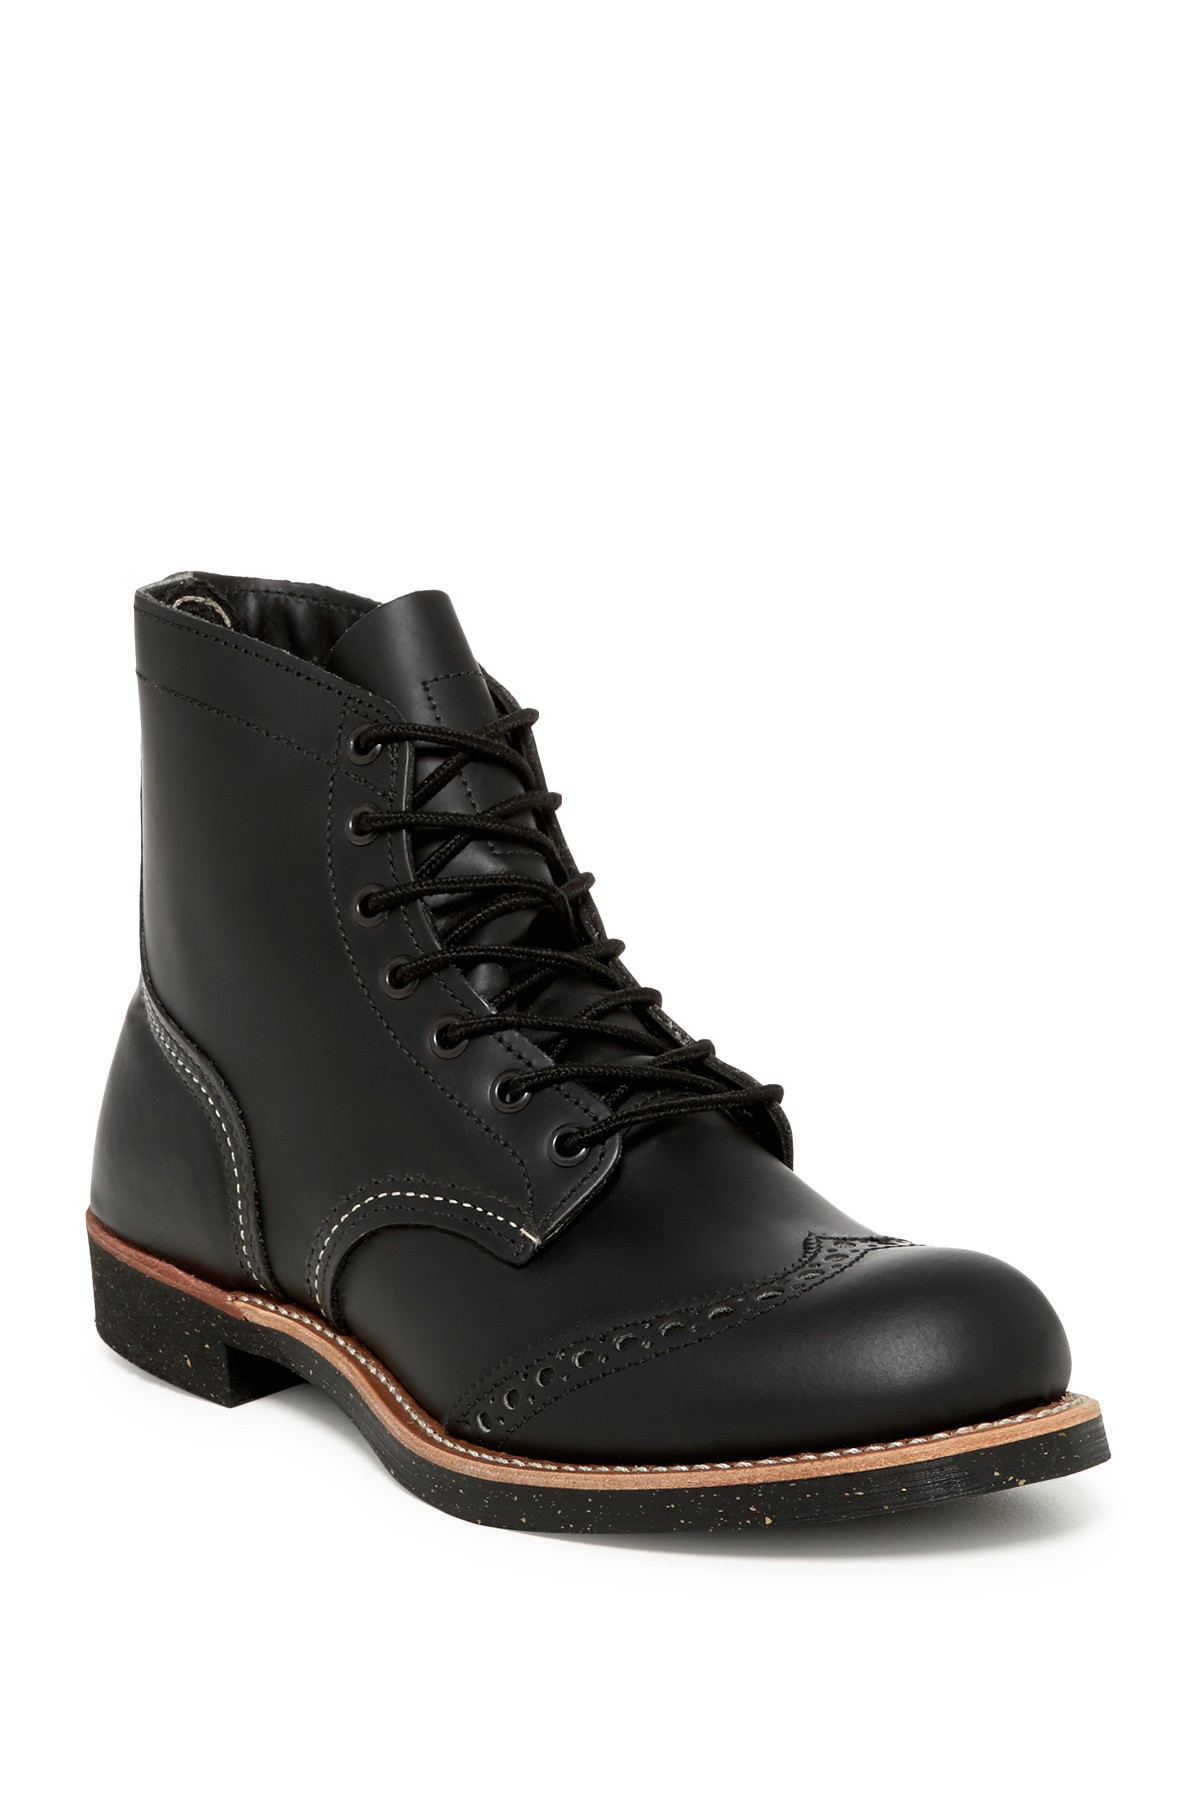 Lyst - Red Wing Brogue Ranger Boot in Black for Men - Save 48. ...